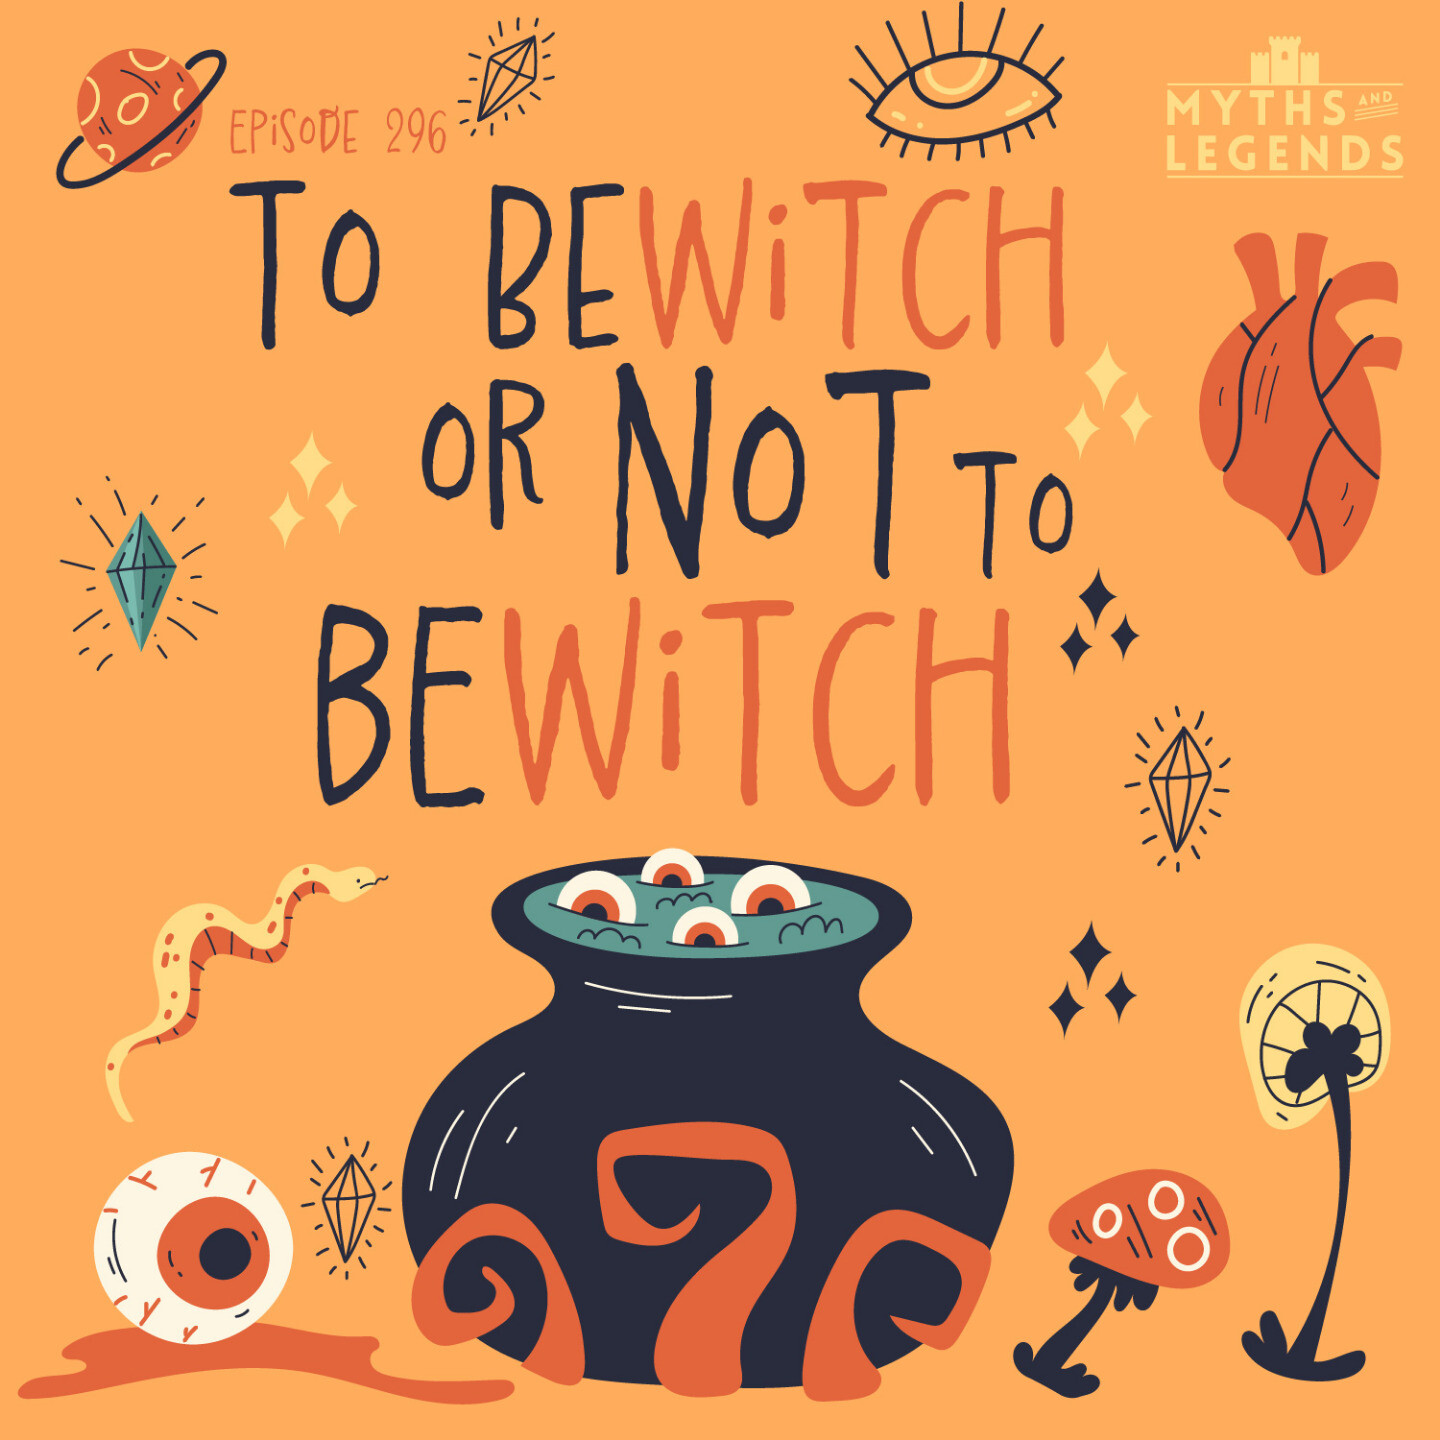 The show art for Myths and Legends episode 296A: To Bewitch or Not to Bewitch. It has a cauldron with eyes in it alongside a bunch of other handdrawn witchy nonsense like snakes, eyes, plants, all against an orange background.